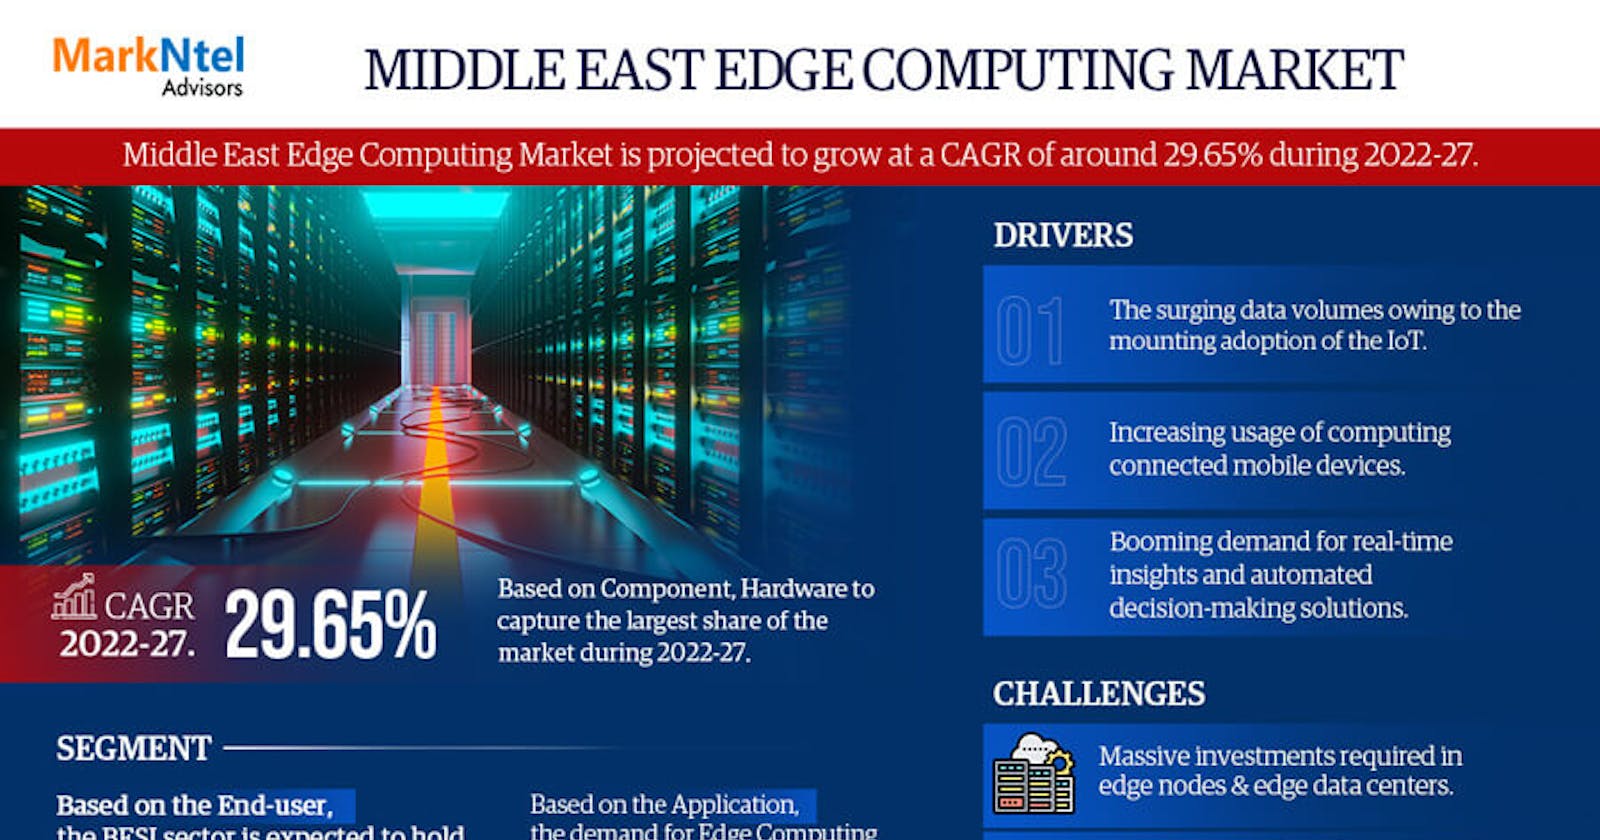 Middle East Edge Computing Market Anticipates Robust 29.65% CAGR for 2022-27